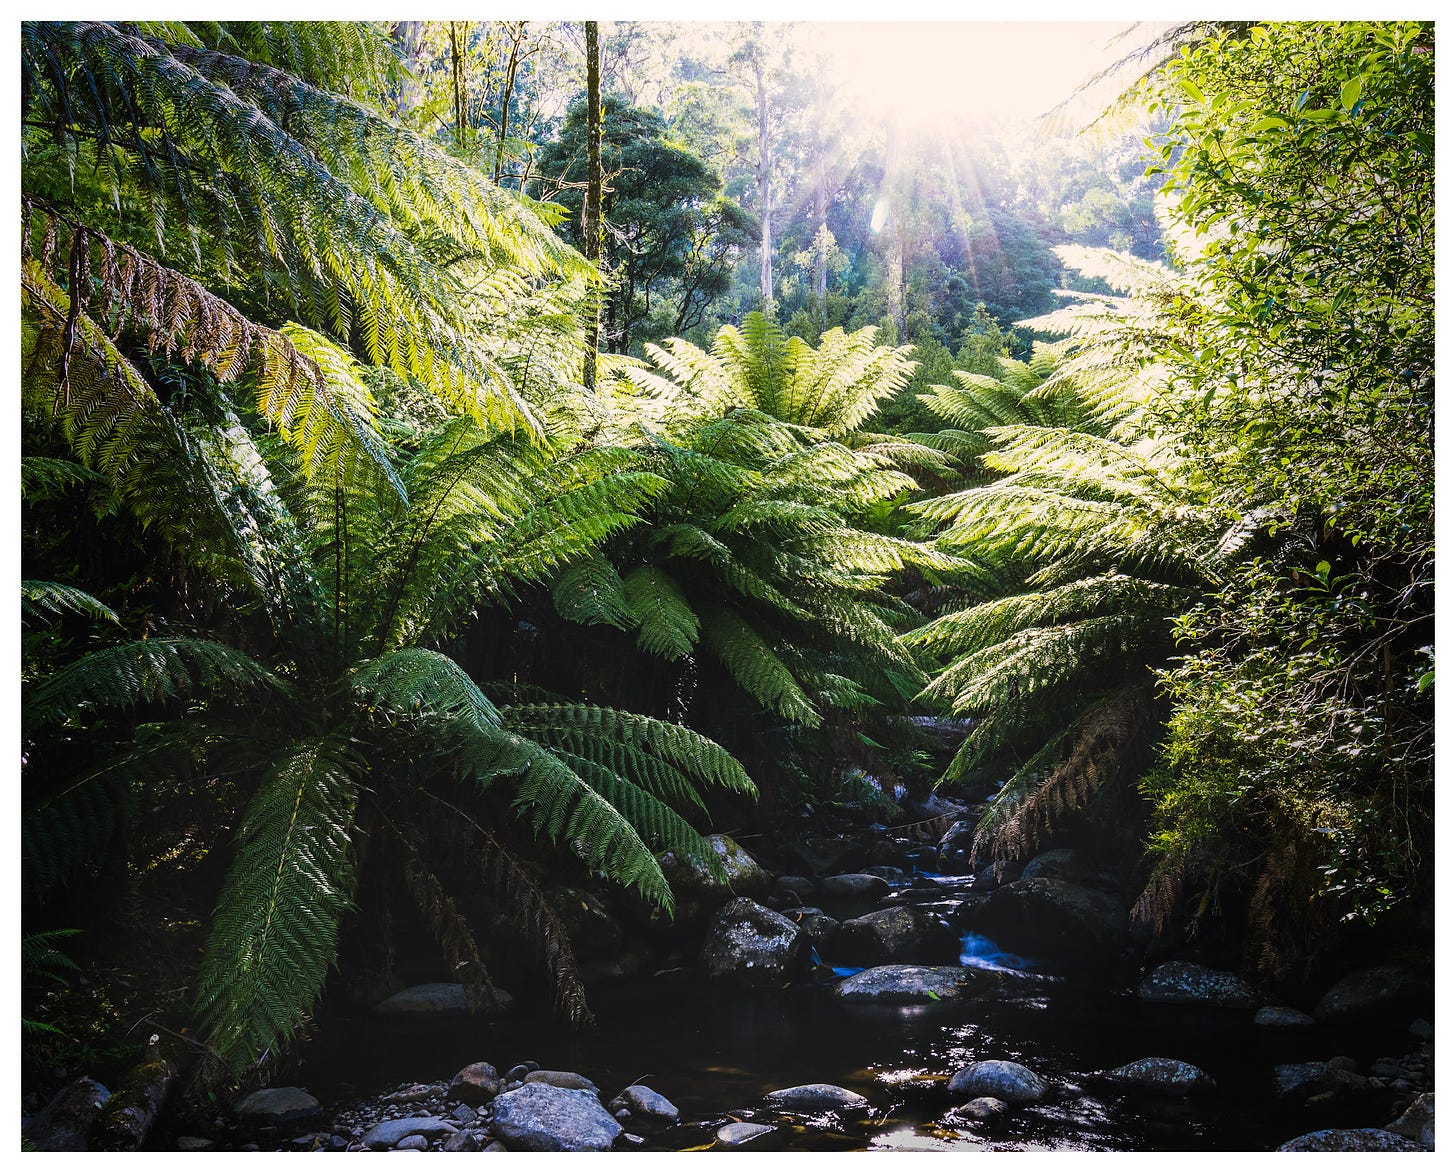 A mountain creek surrounded by tree ferns in harsh summer light